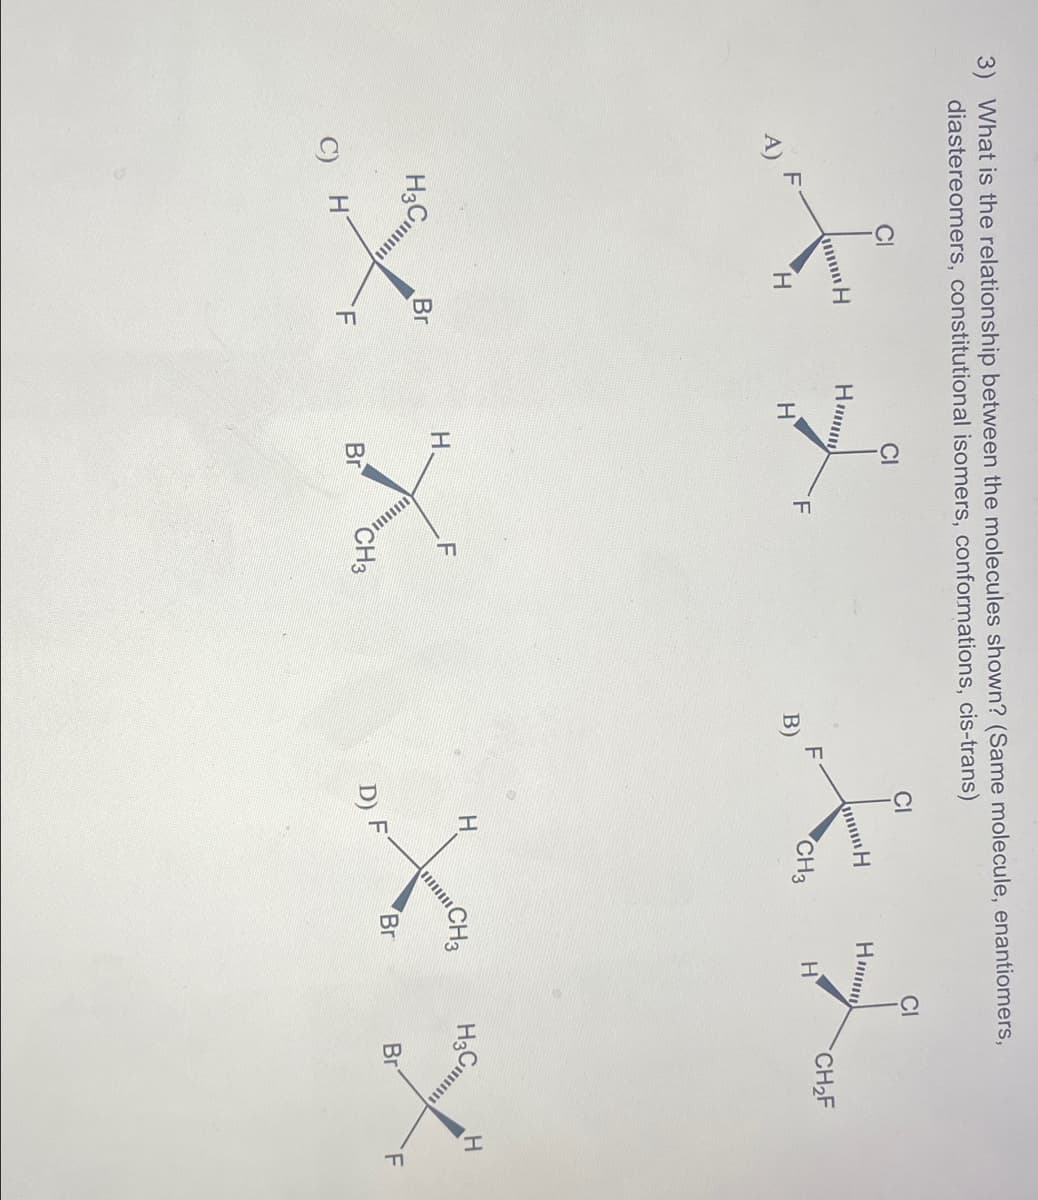 3) What is the relationship between the molecules shown? (Same molecule, enantiomers,
diastereomers, constitutional isomers, conformations, cis-trans)
CI
CI
CI
H
Hum
f
X L
H
Hmmm
CH₂F
F
CH3
H
H
H
B)
H3 C
H
H
CH3
F
H.
H3 Cl
Br
Br
XX
Br
X X
CH3
F
Br
H
C)
F
D) F